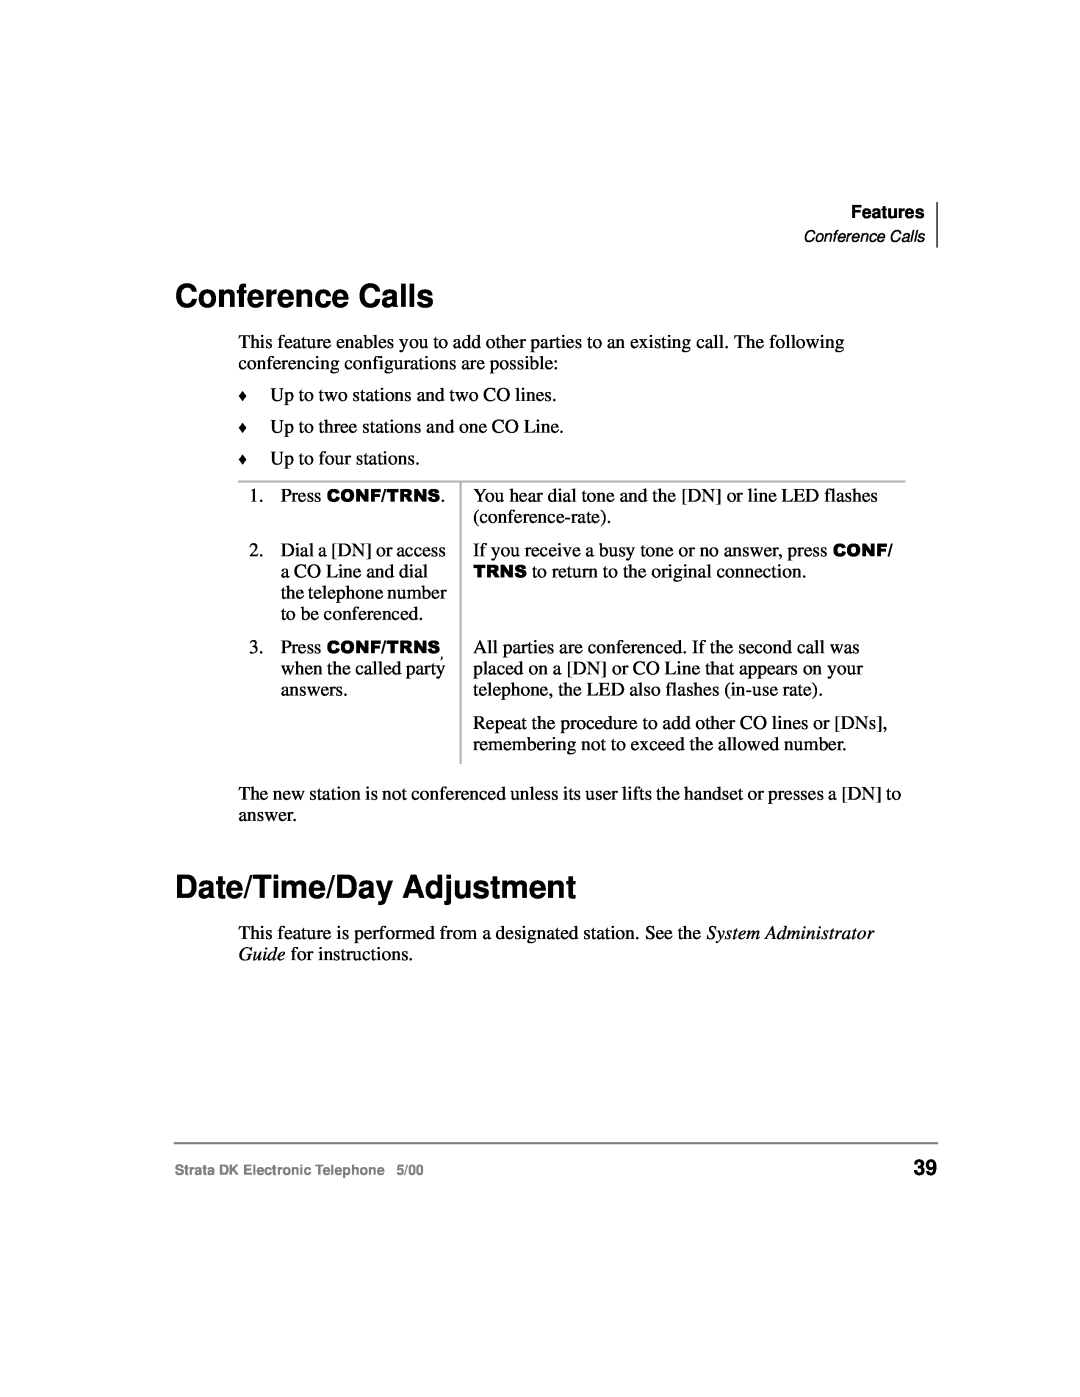 Toshiba Strata DK manual Conference Calls, Date/Time/Day Adjustment 